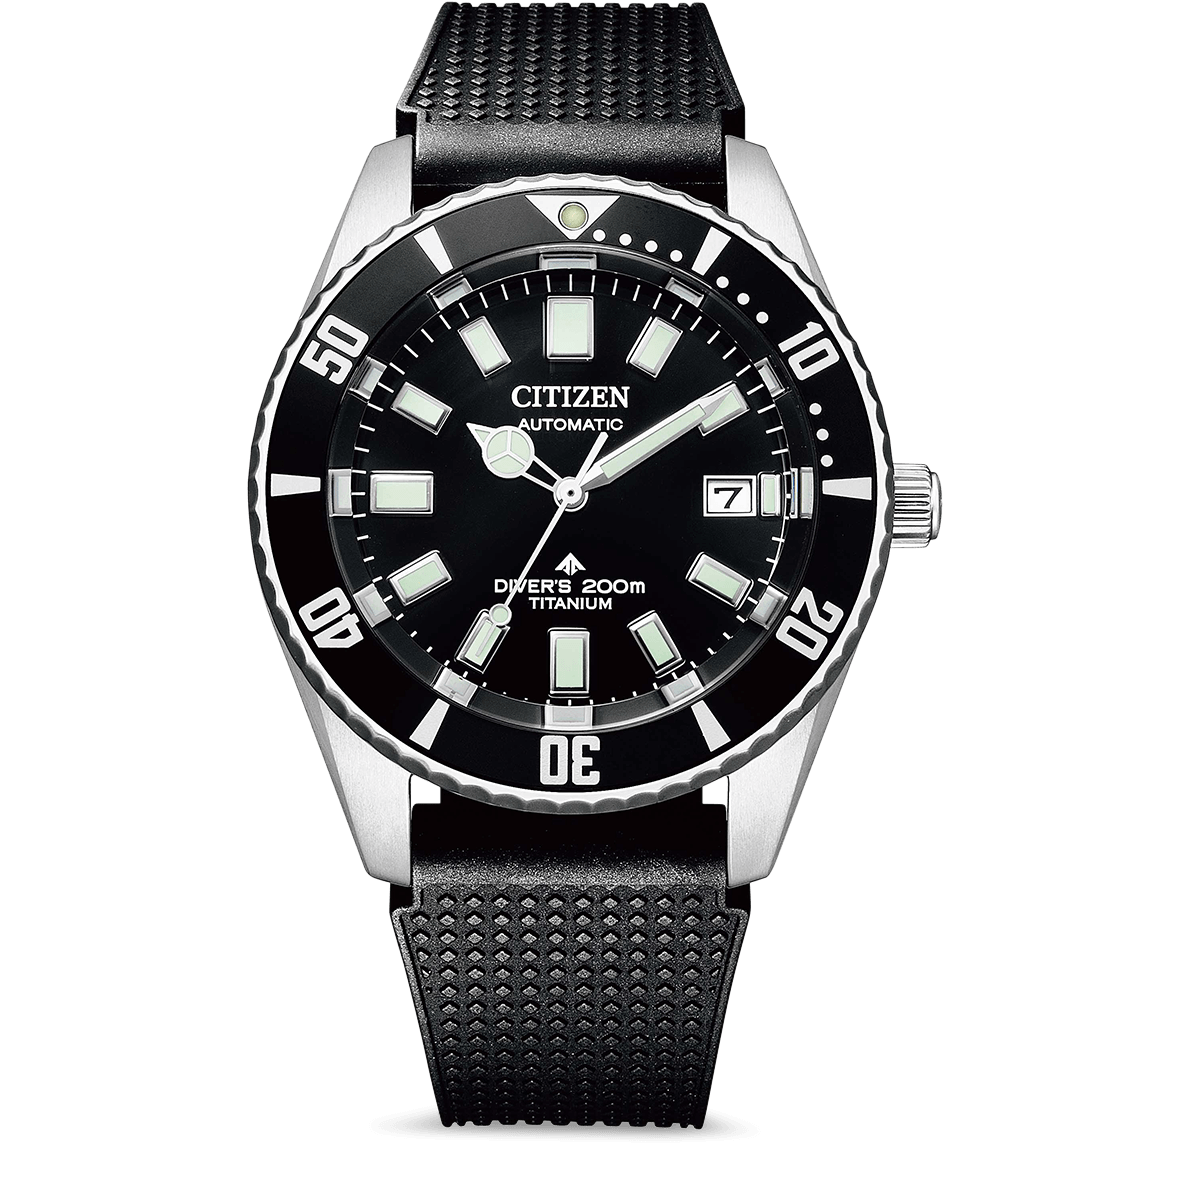 Promaster Mechanical Diver